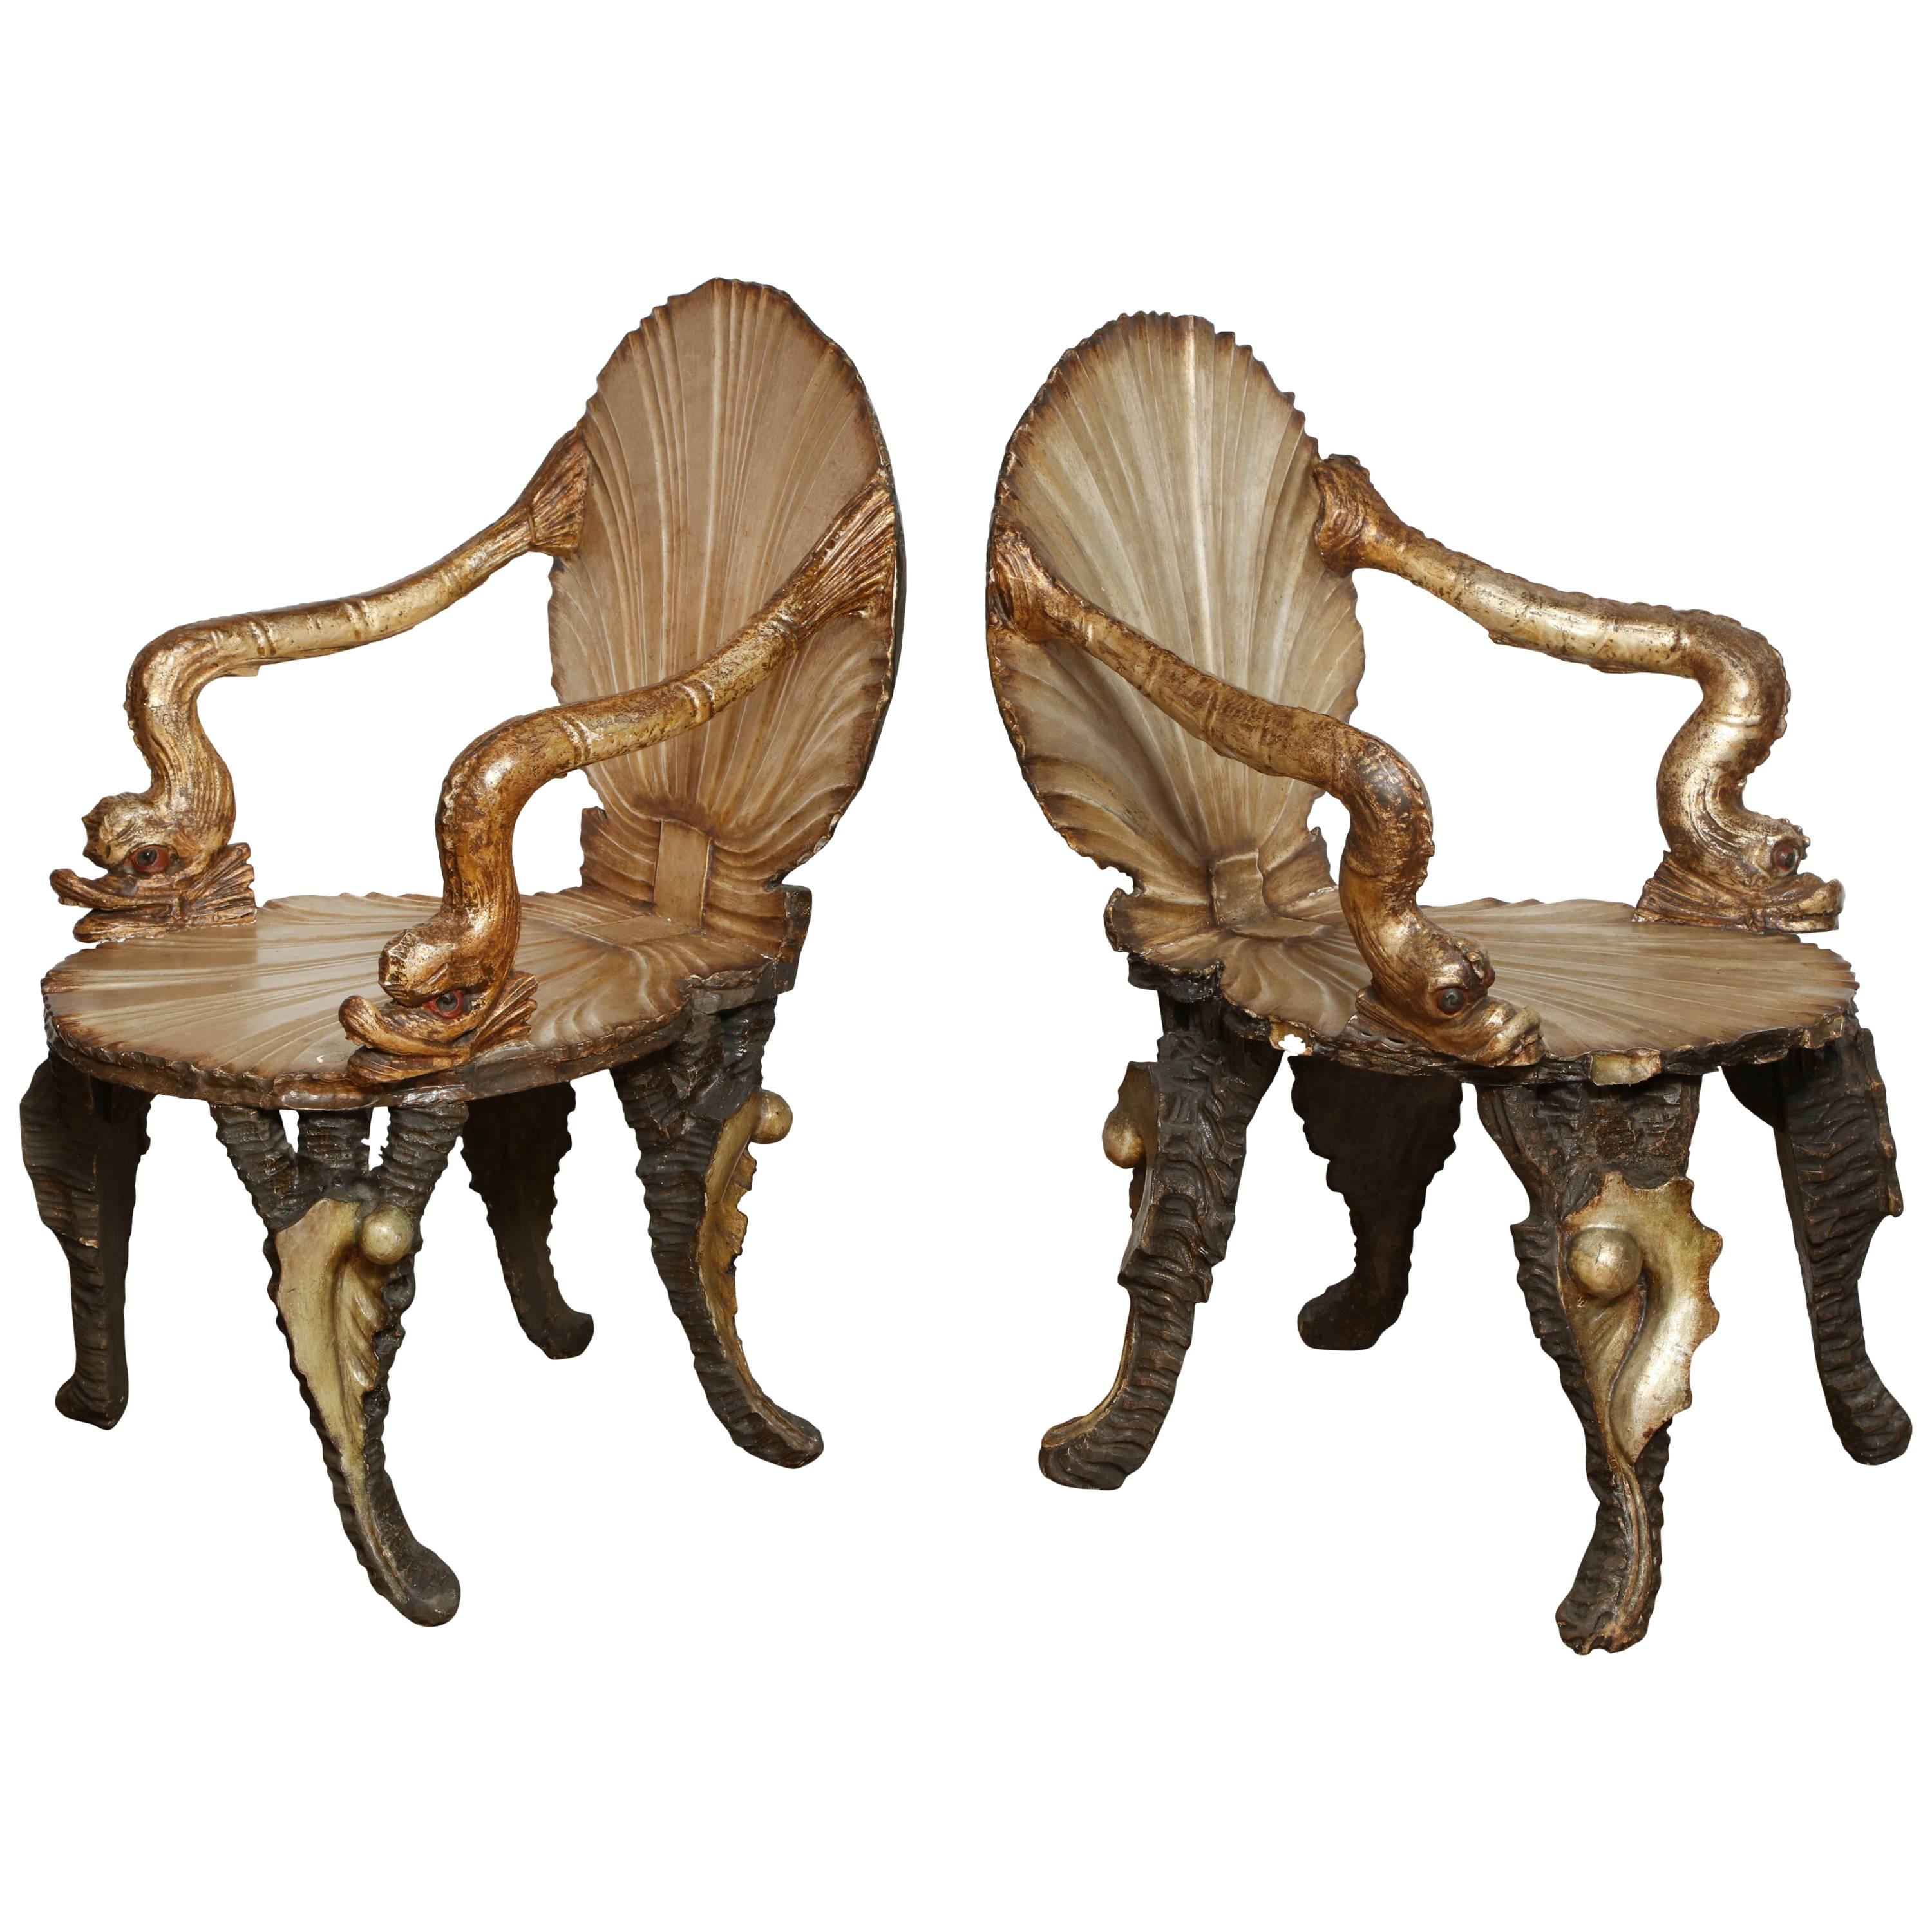 Pair of Venetian Baroque-Style Shell Chairs